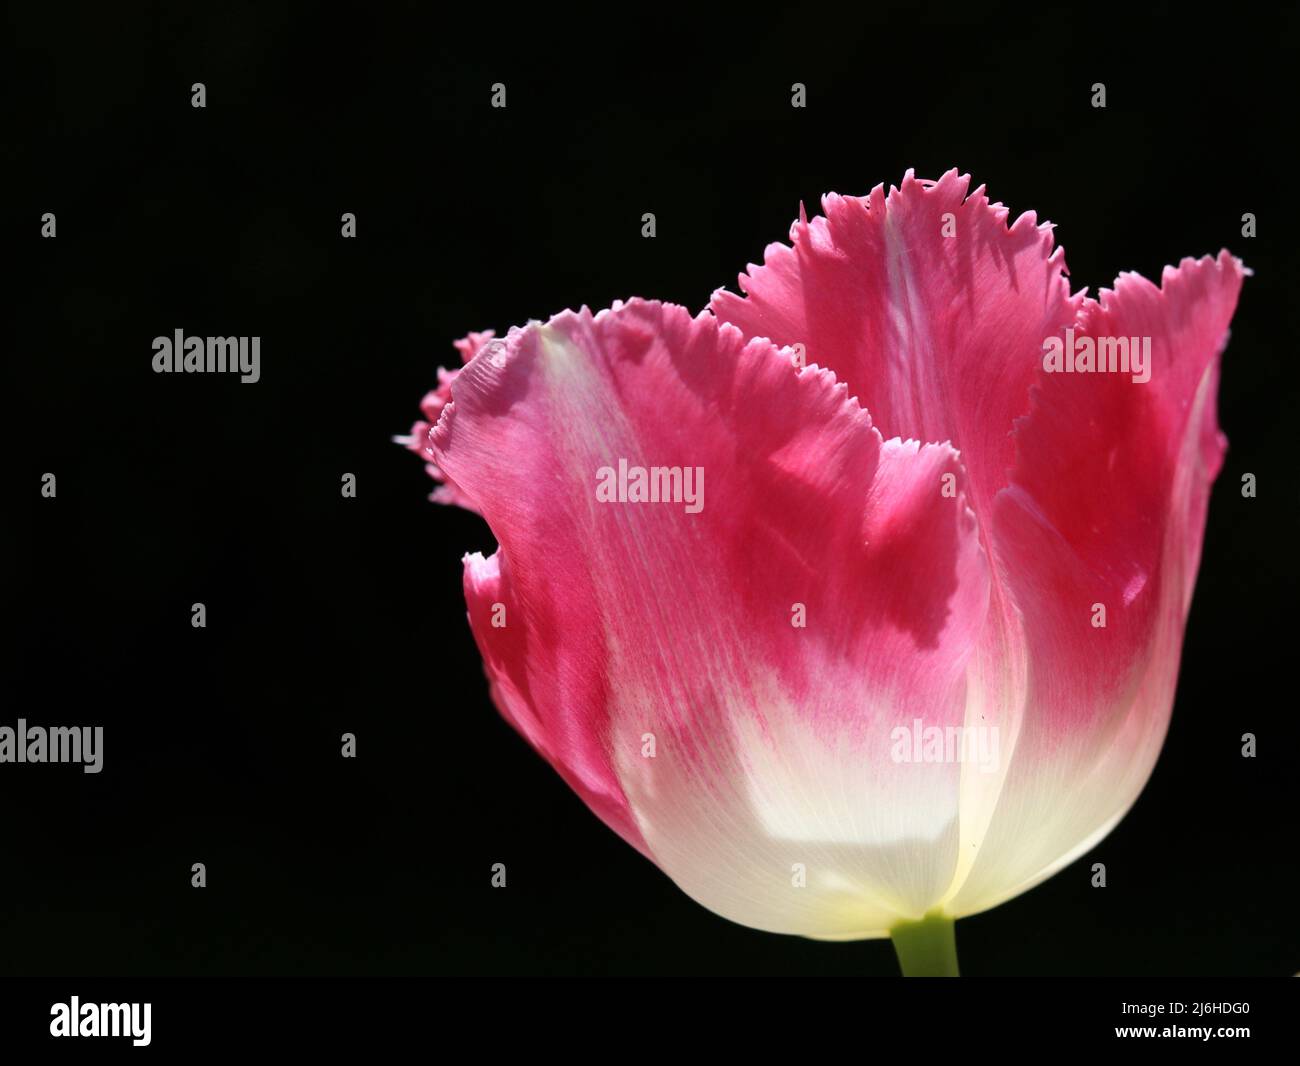 Pink tulip with fringed petals against plain black background with copyspace Stock Photo